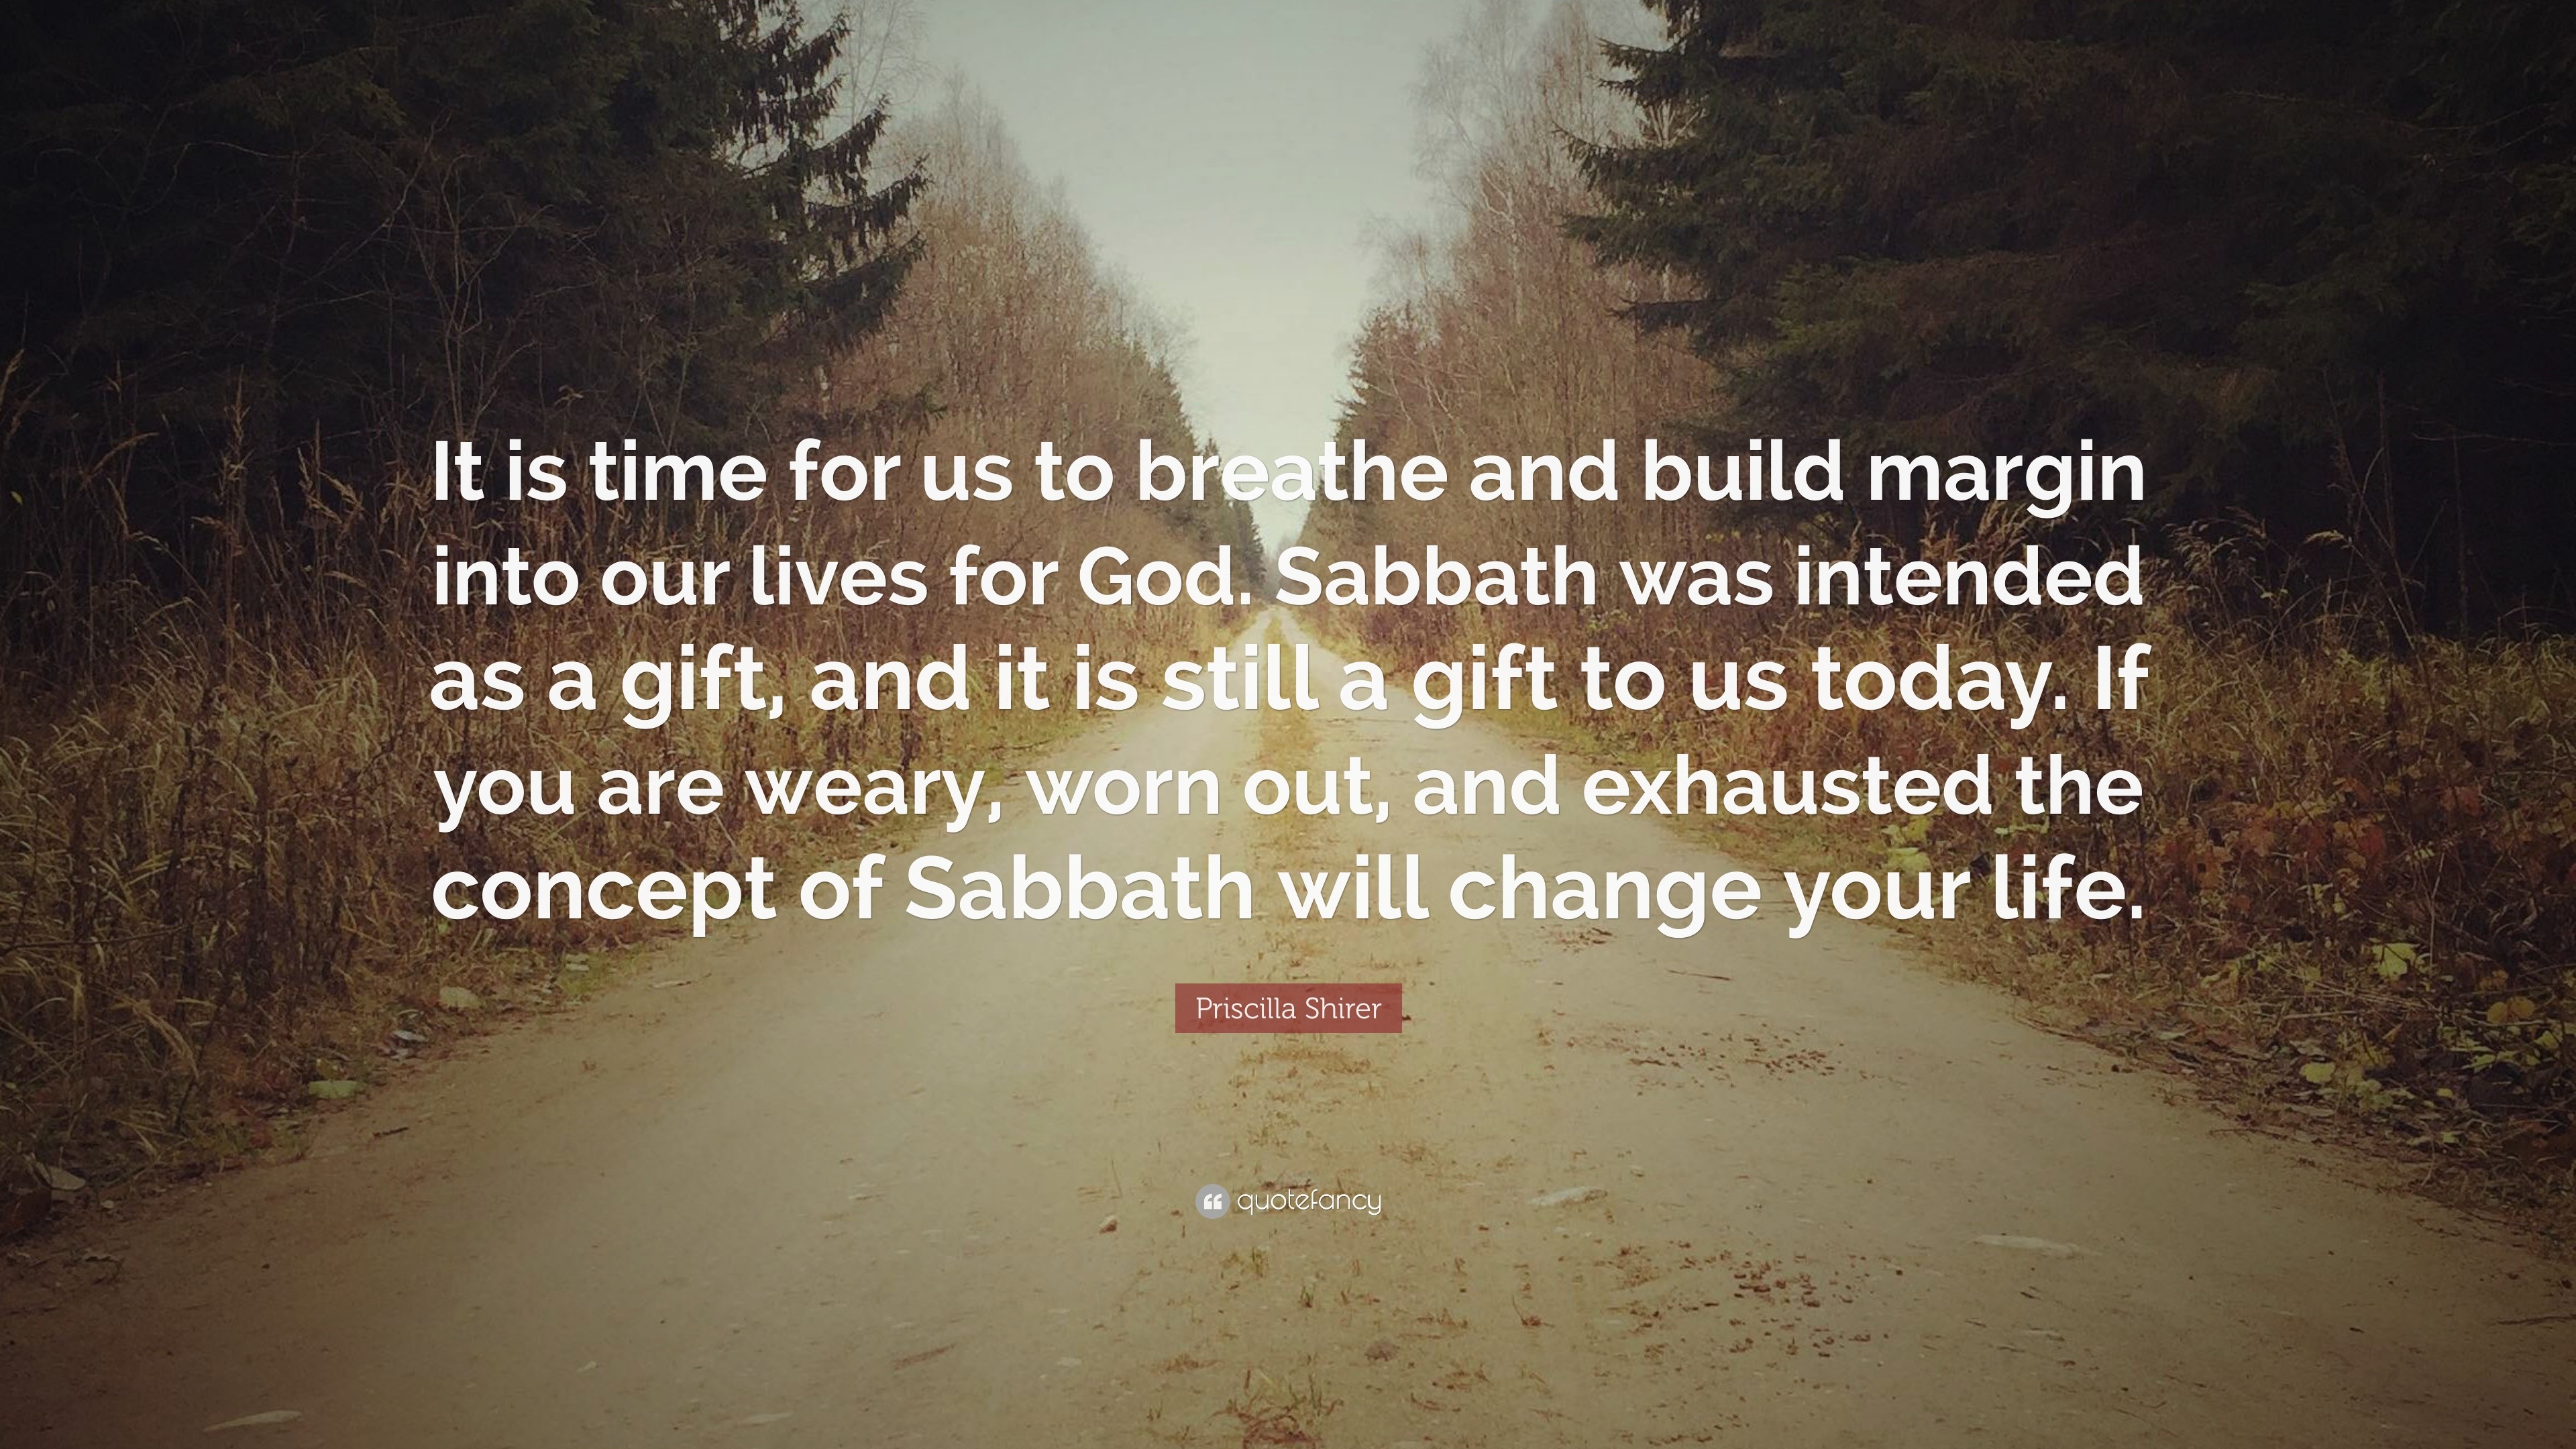 Priscilla Shirer Quote: “It is time for us to breathe and build margin ...